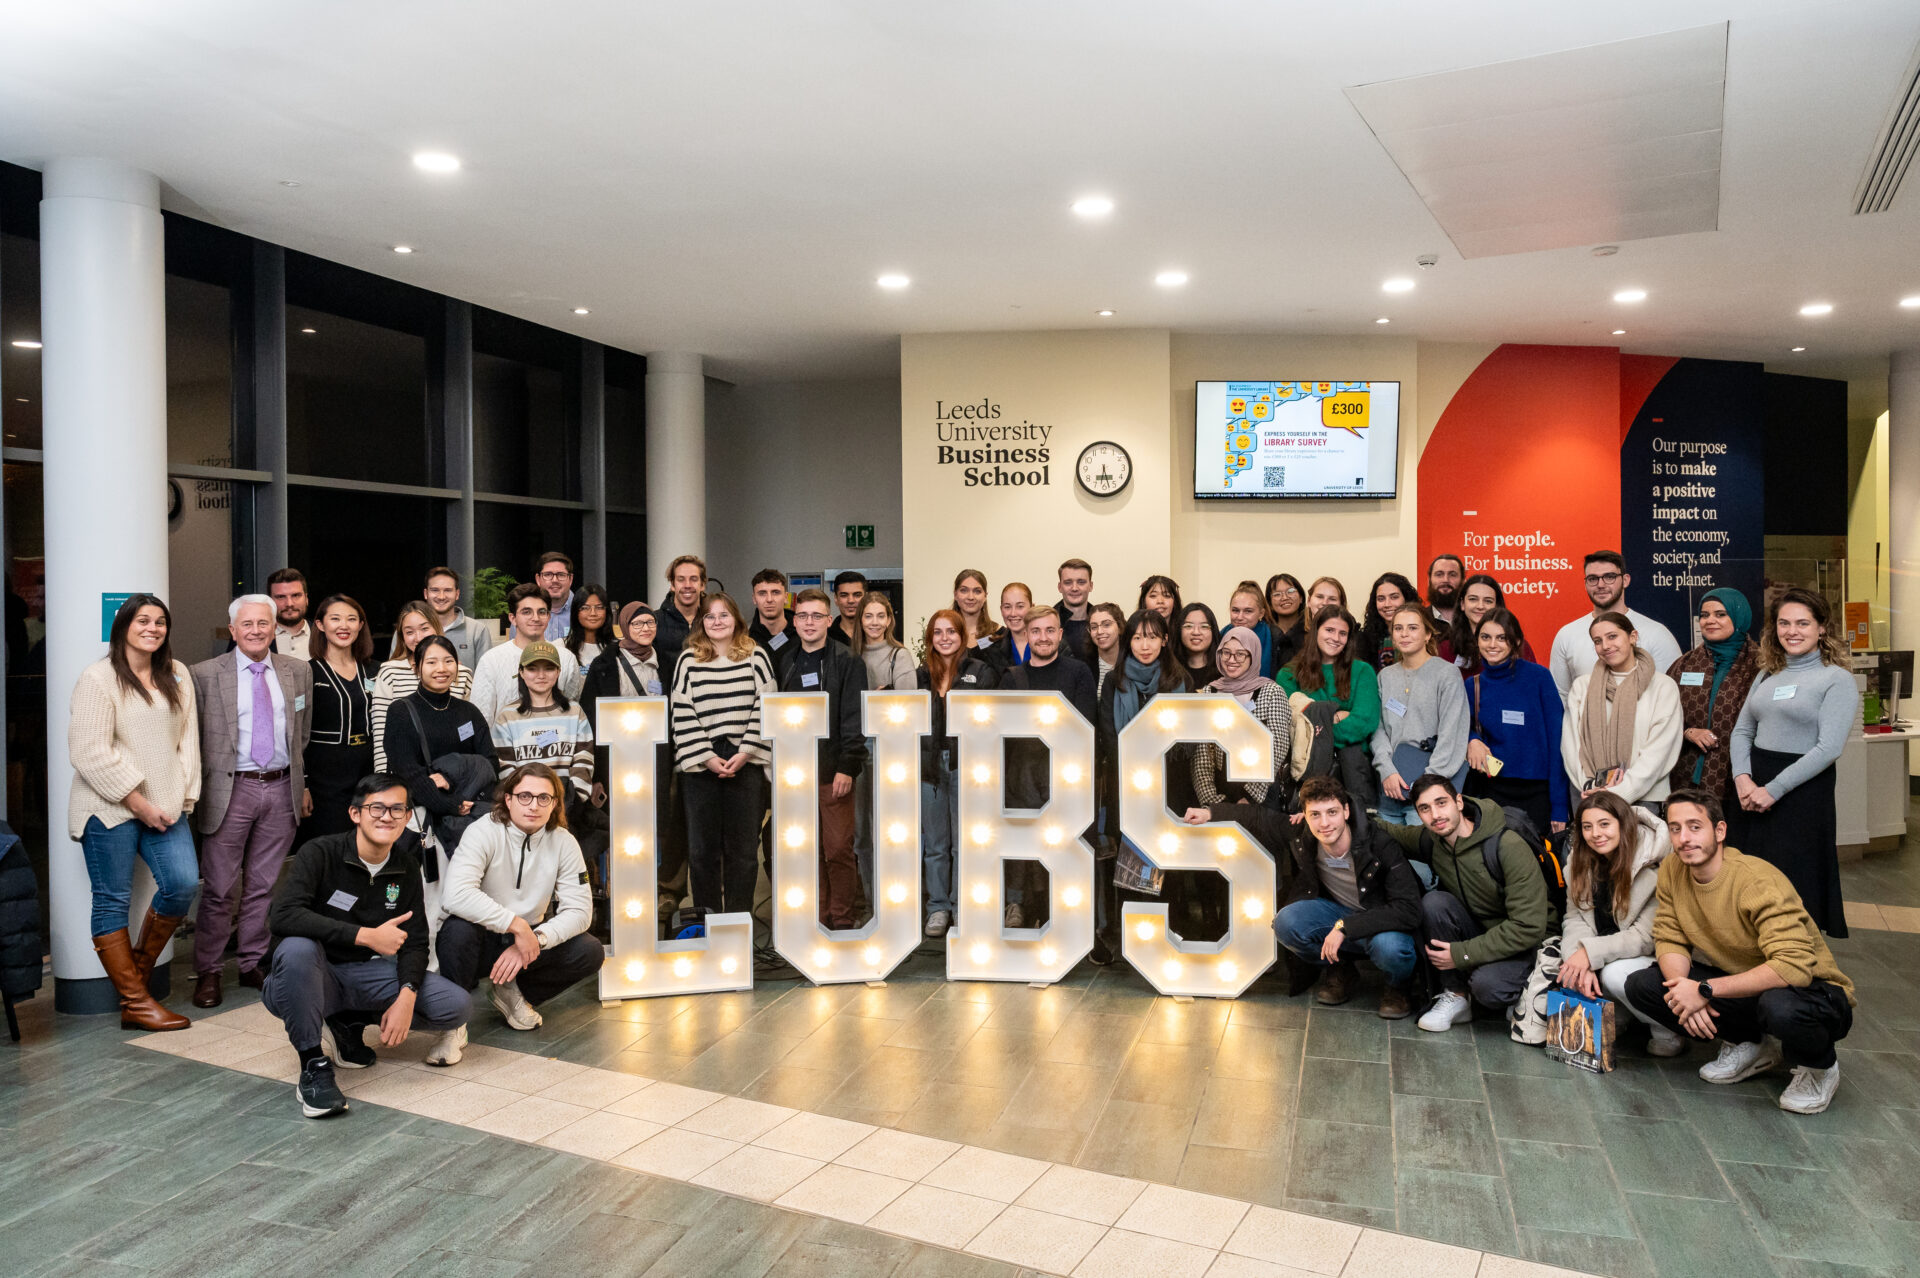 A large group of Study abroad students who have just arrived in Leeds are gathered, smiling and happy, around large lit-up letters spelling L U B S